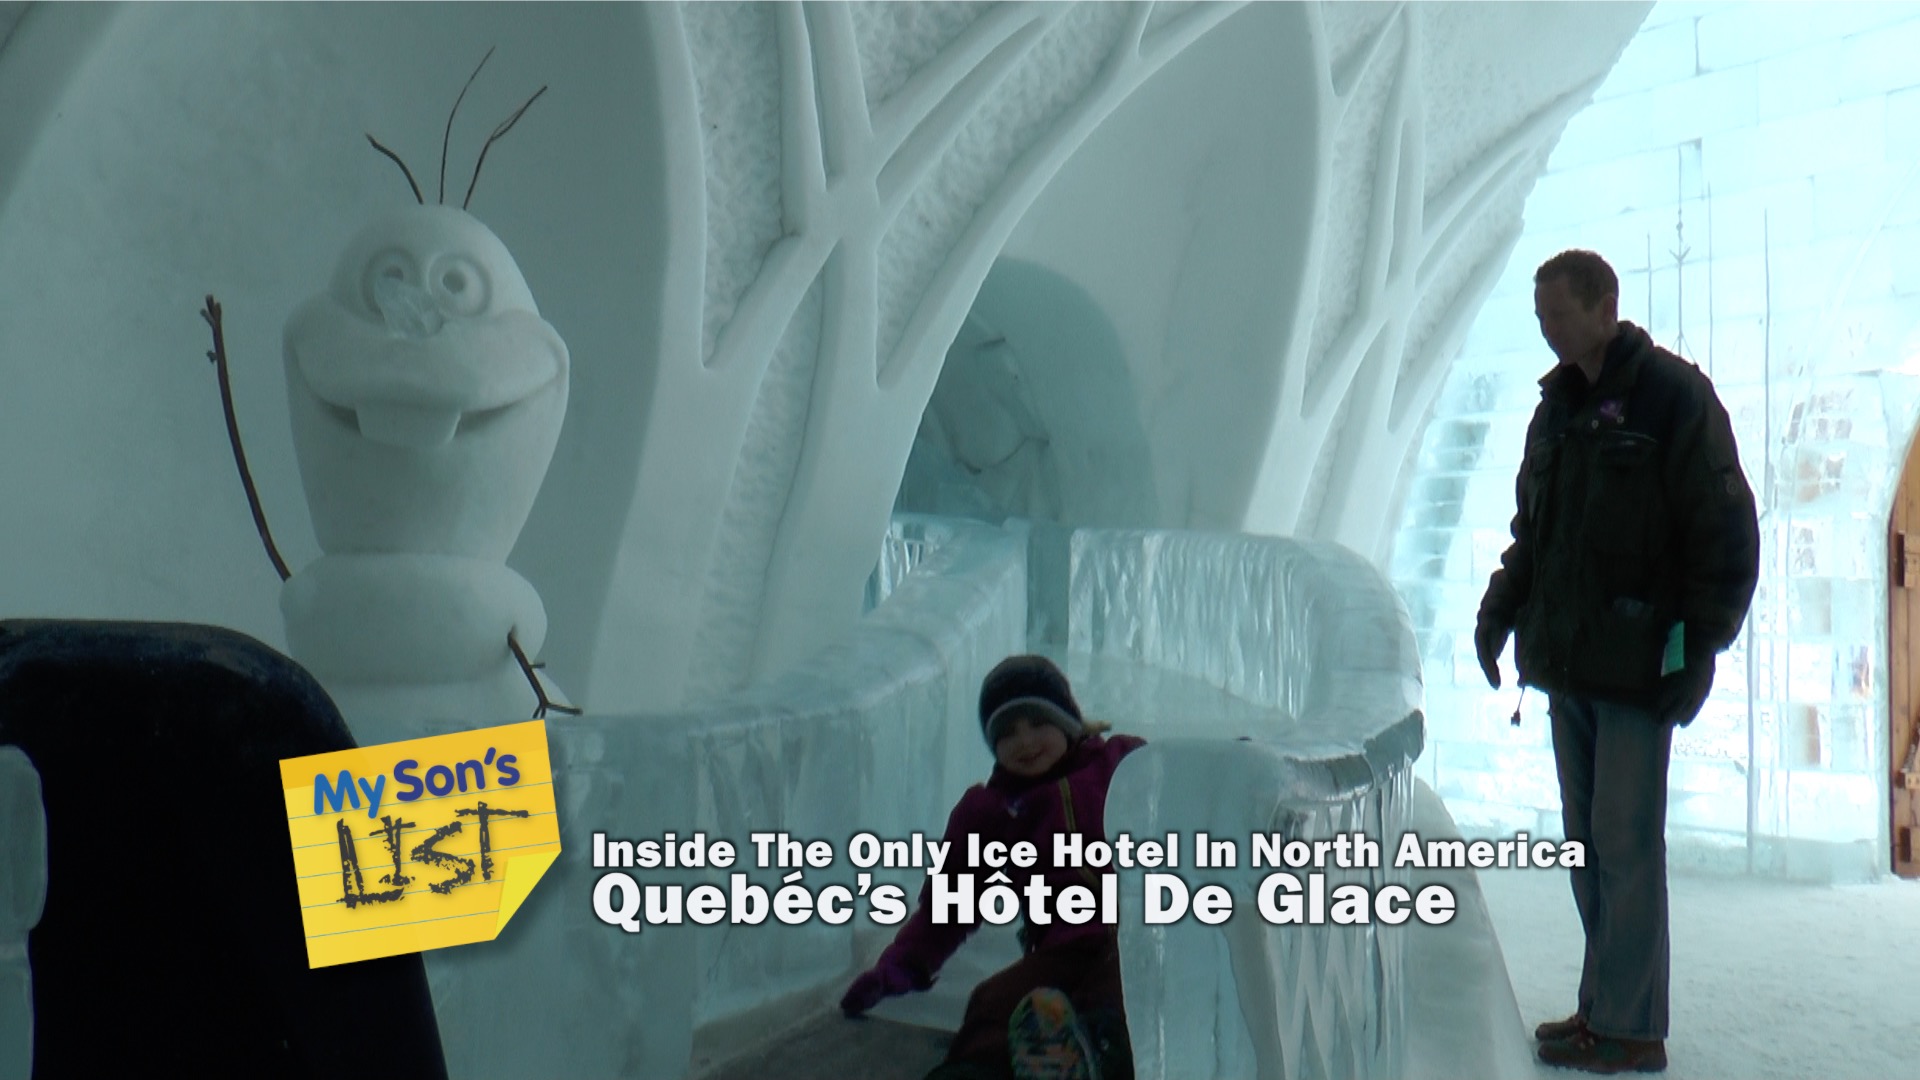 Amazing Vacations: Tour of North America’s Only Ice Hotel - Quebec’s Hotel De Glace